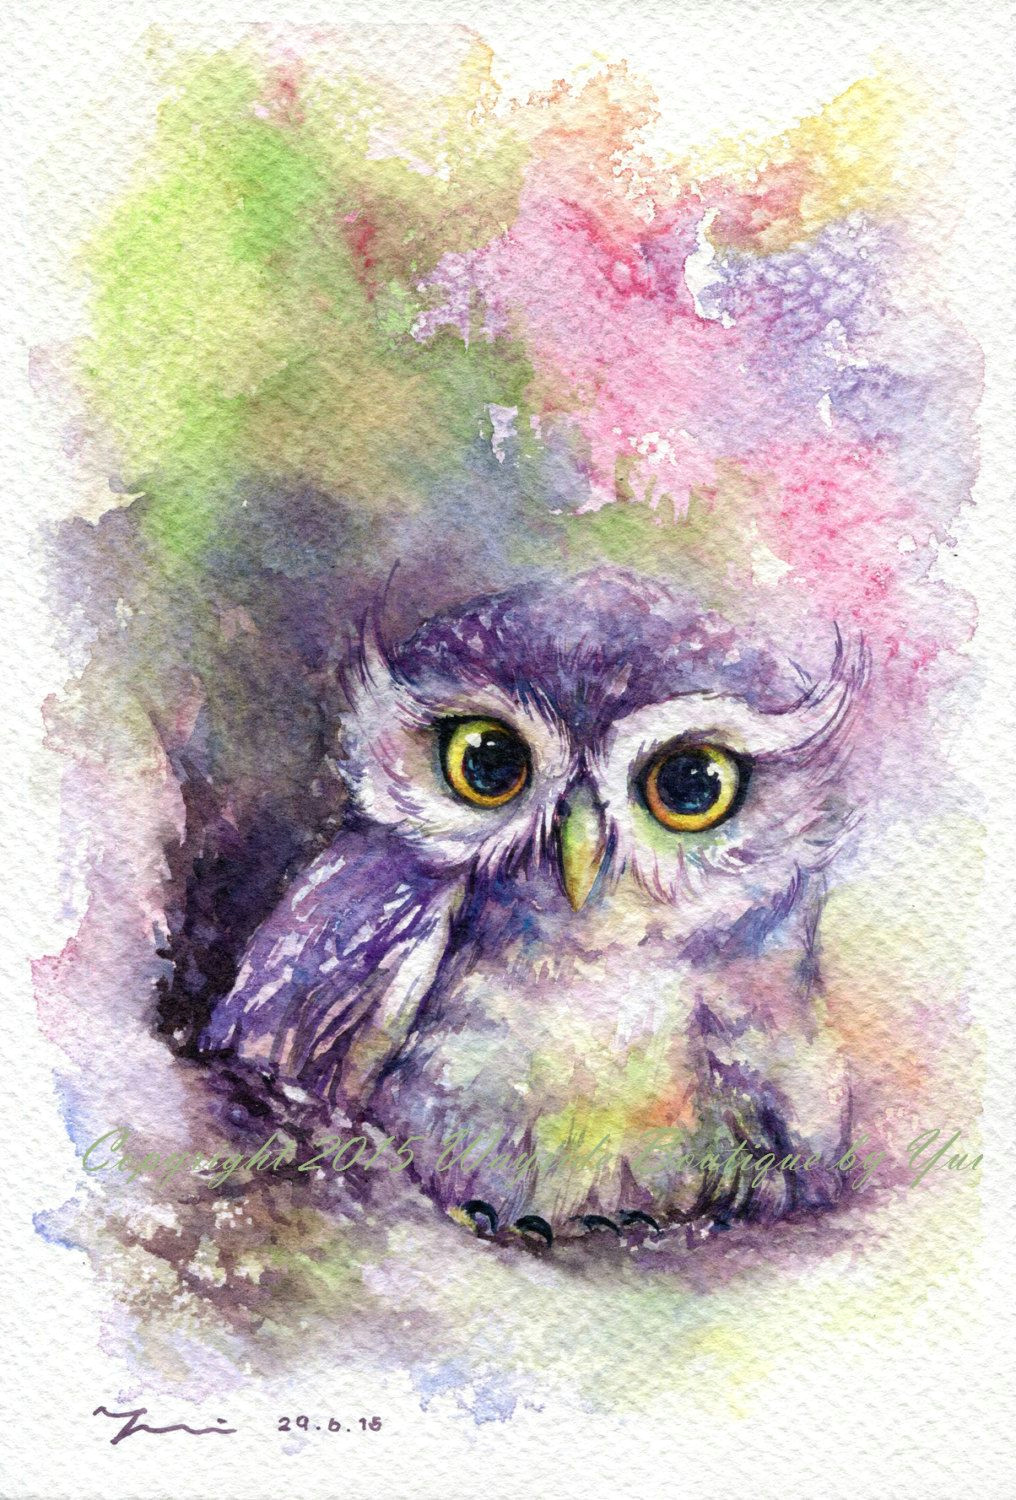 rainbow owl original watercolor painting 7 5x11 inches by waysideboutique on etsy